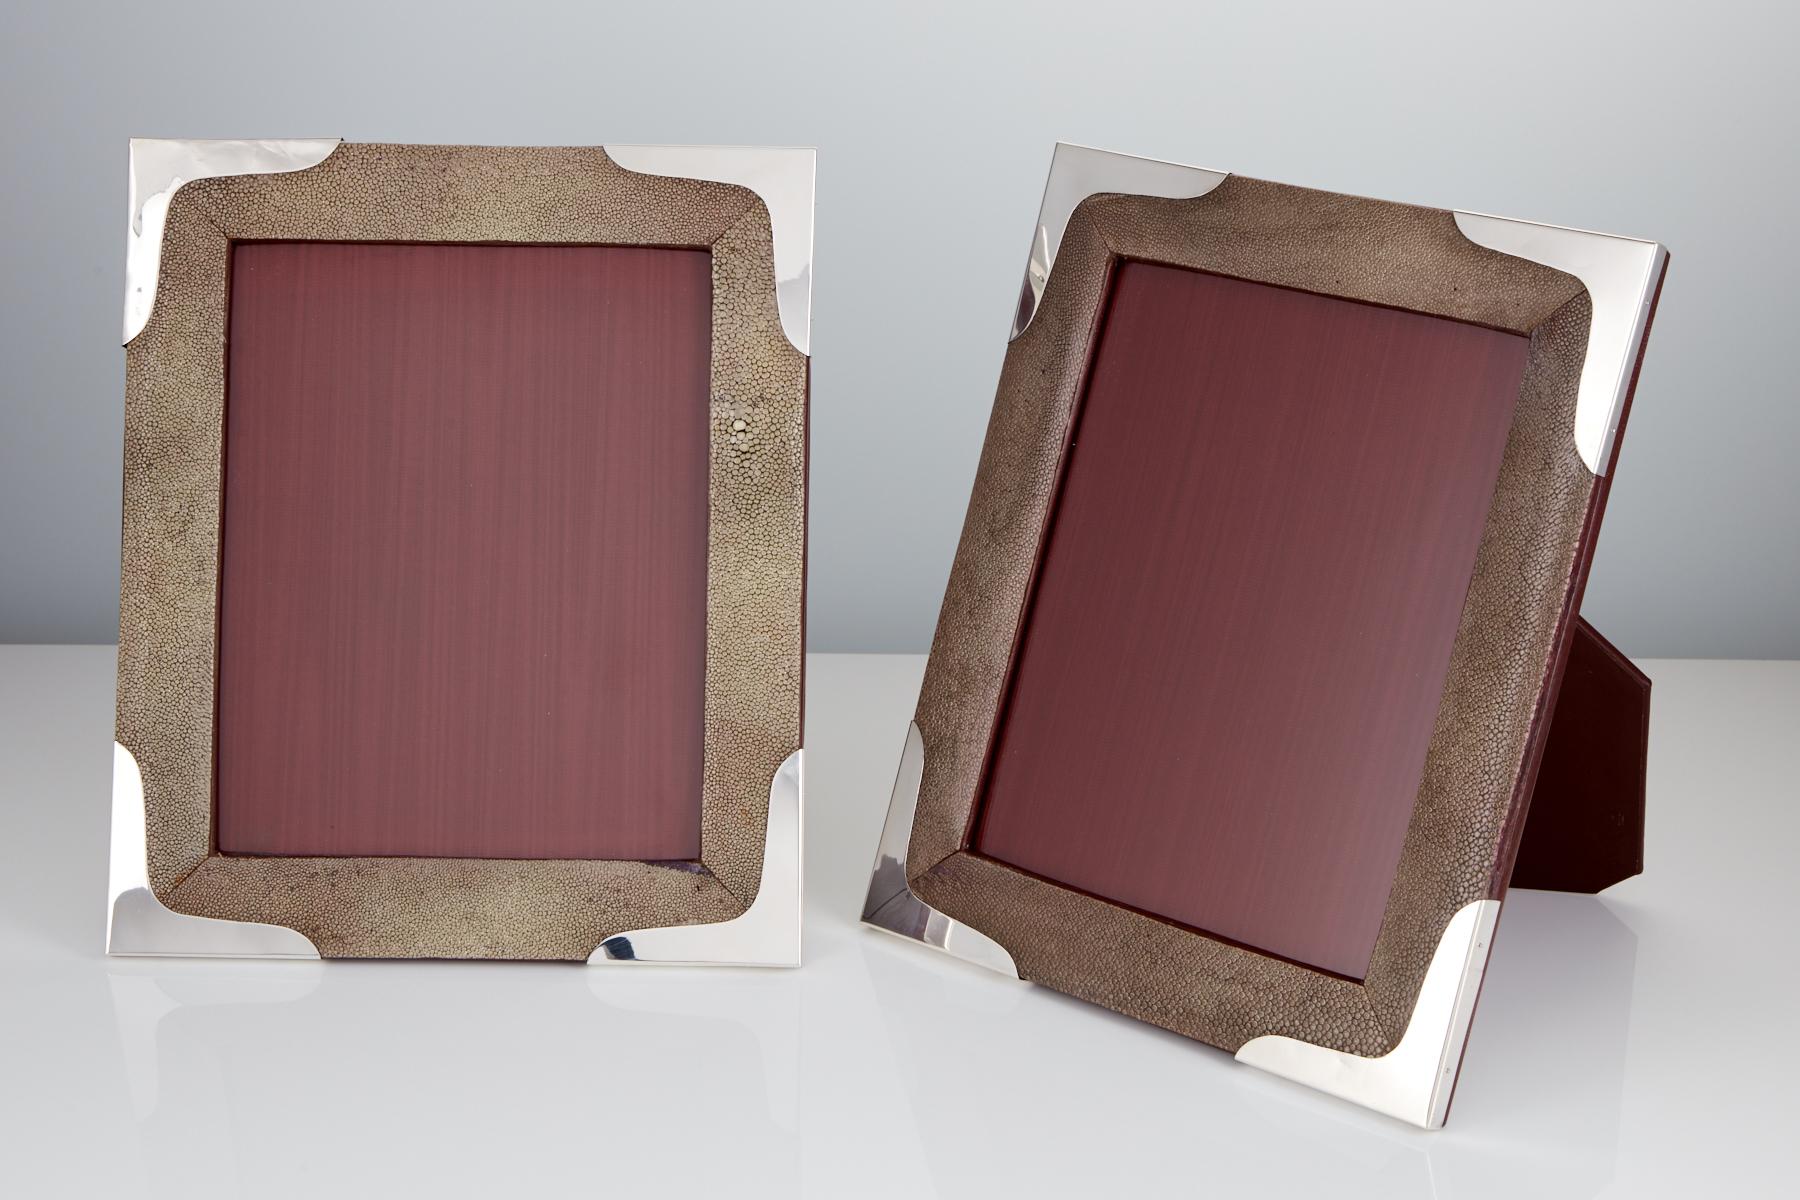 English Pair of Large Mid-20th Century Shagreen Photo Frames, circa 1960 For Sale